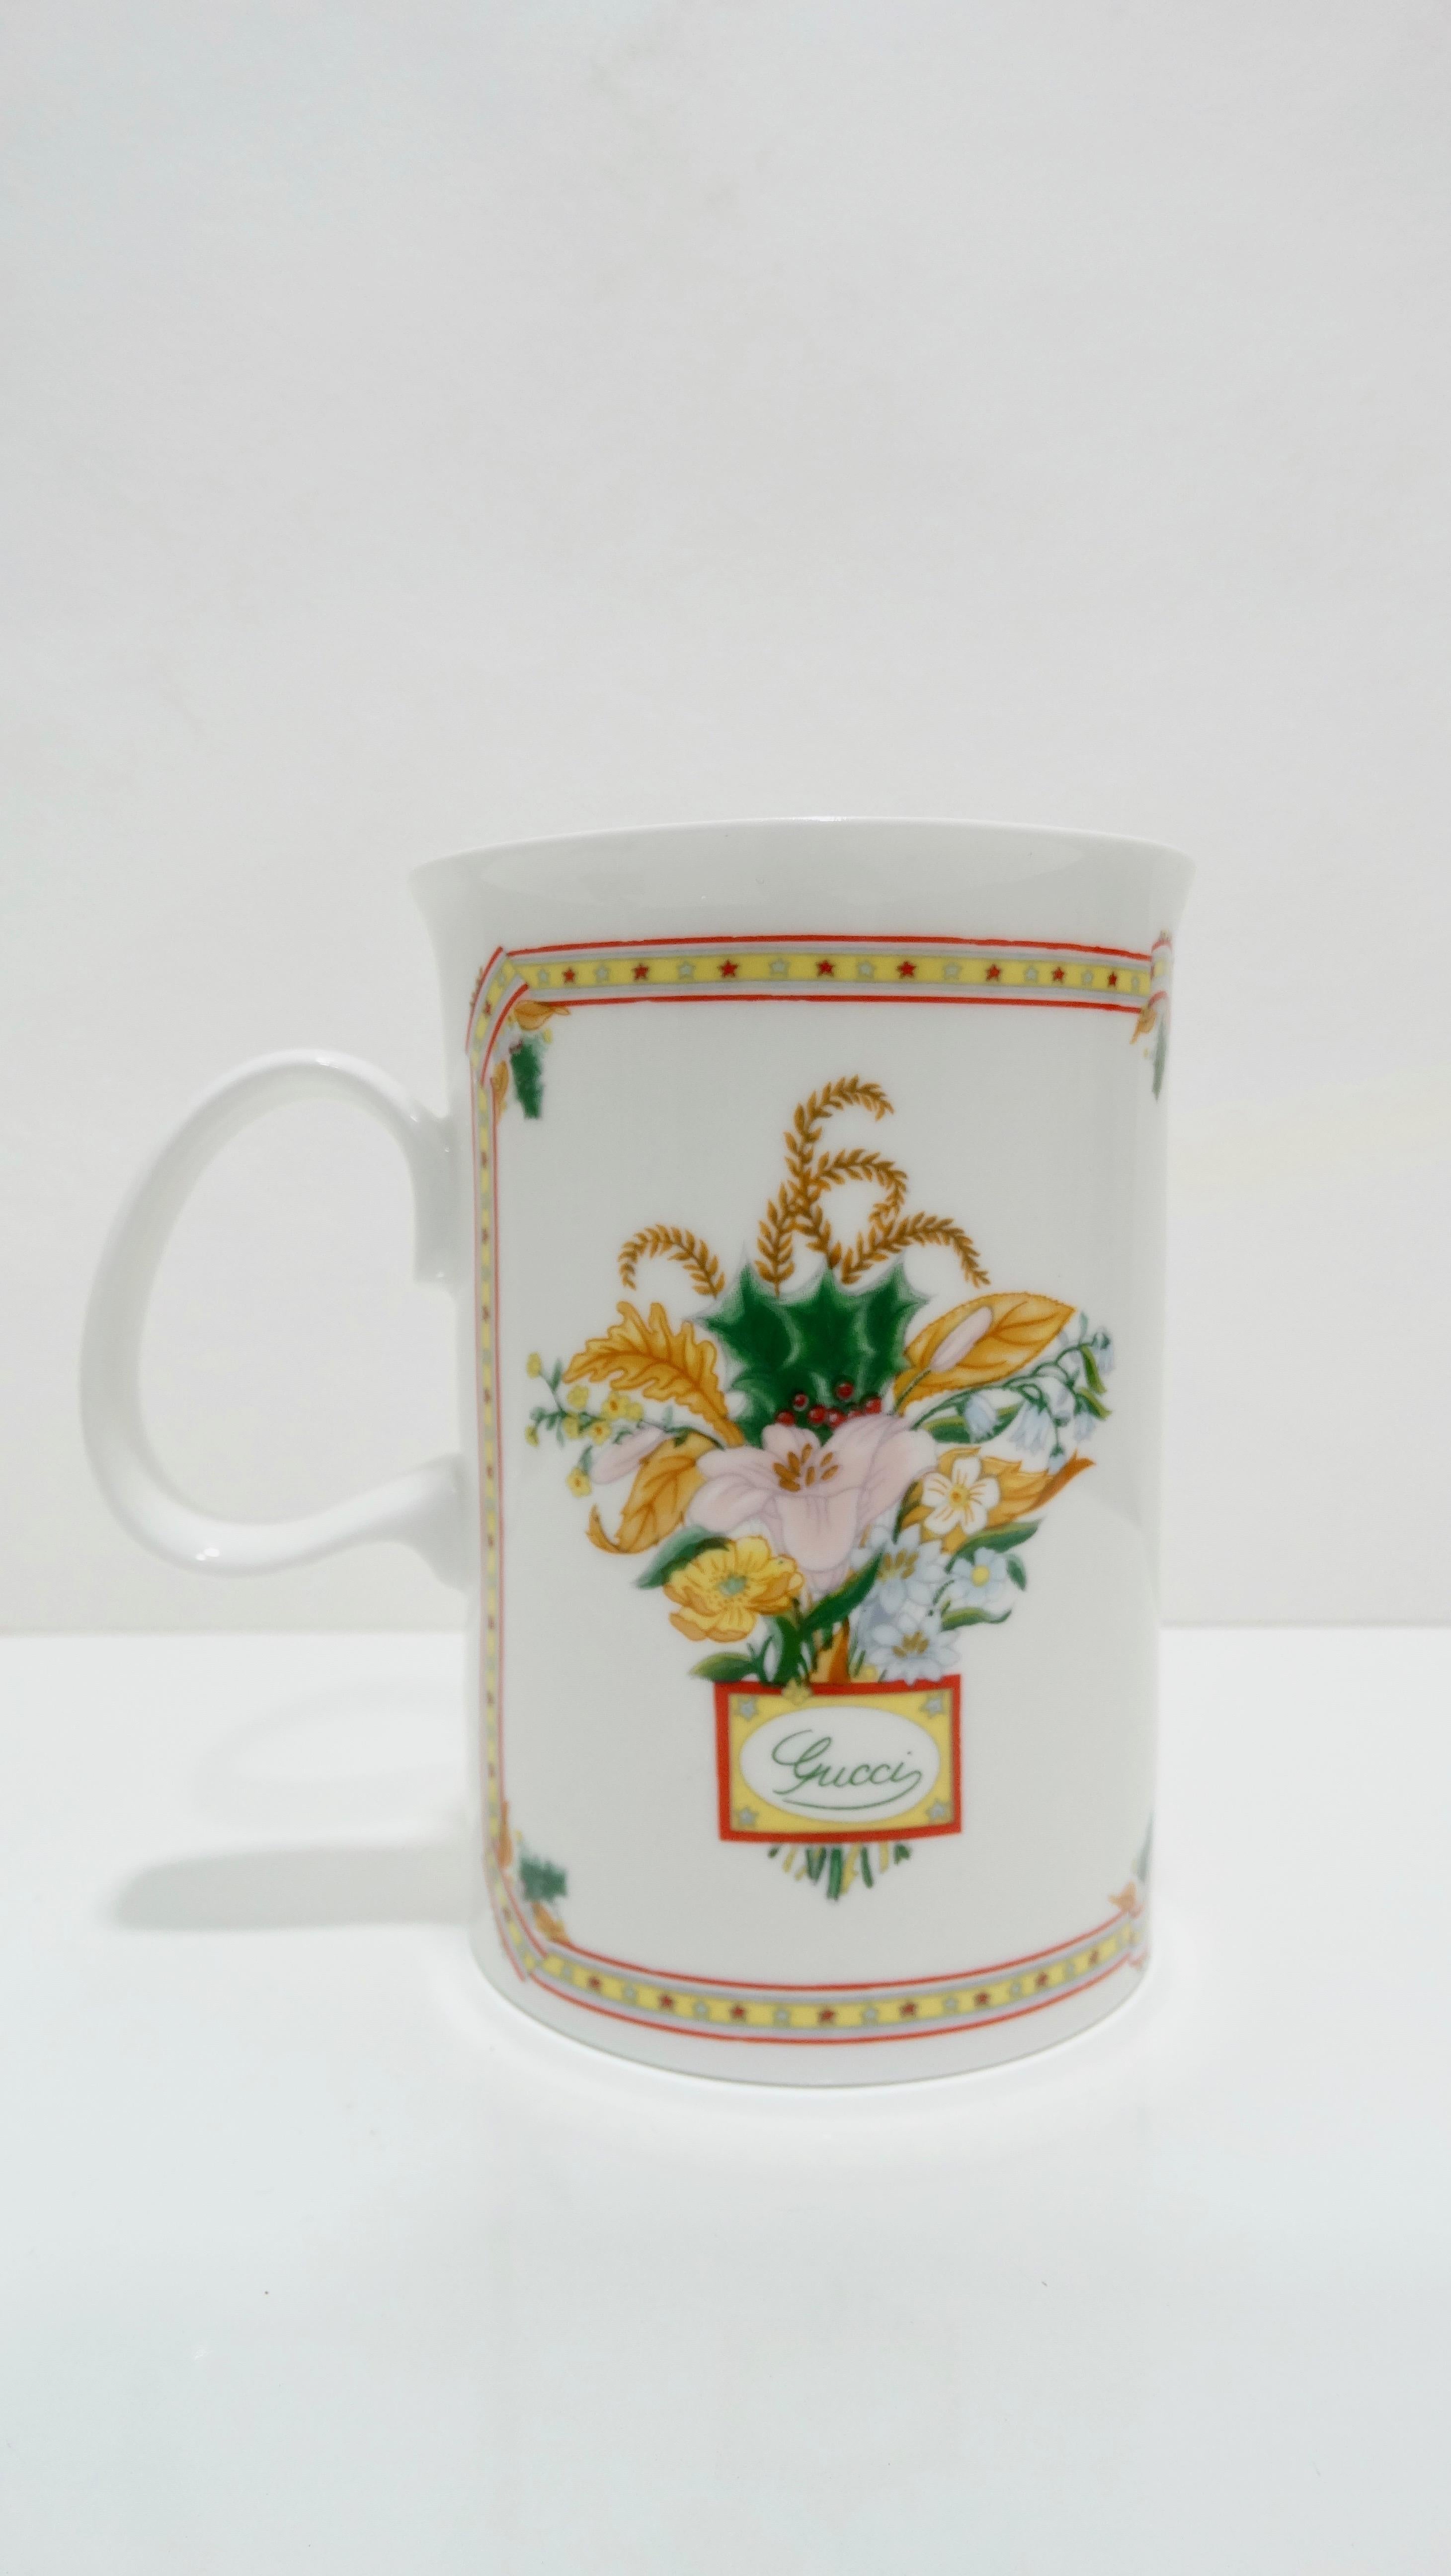 Elevate your dinner setting during the holidays with this set of Gucci mugs! Circa late 1970s/early 1980s, this set includes 6 mugs crafted from fine bone china. Each mug features a dual design with a flora motif on one side and a Christmas motif on